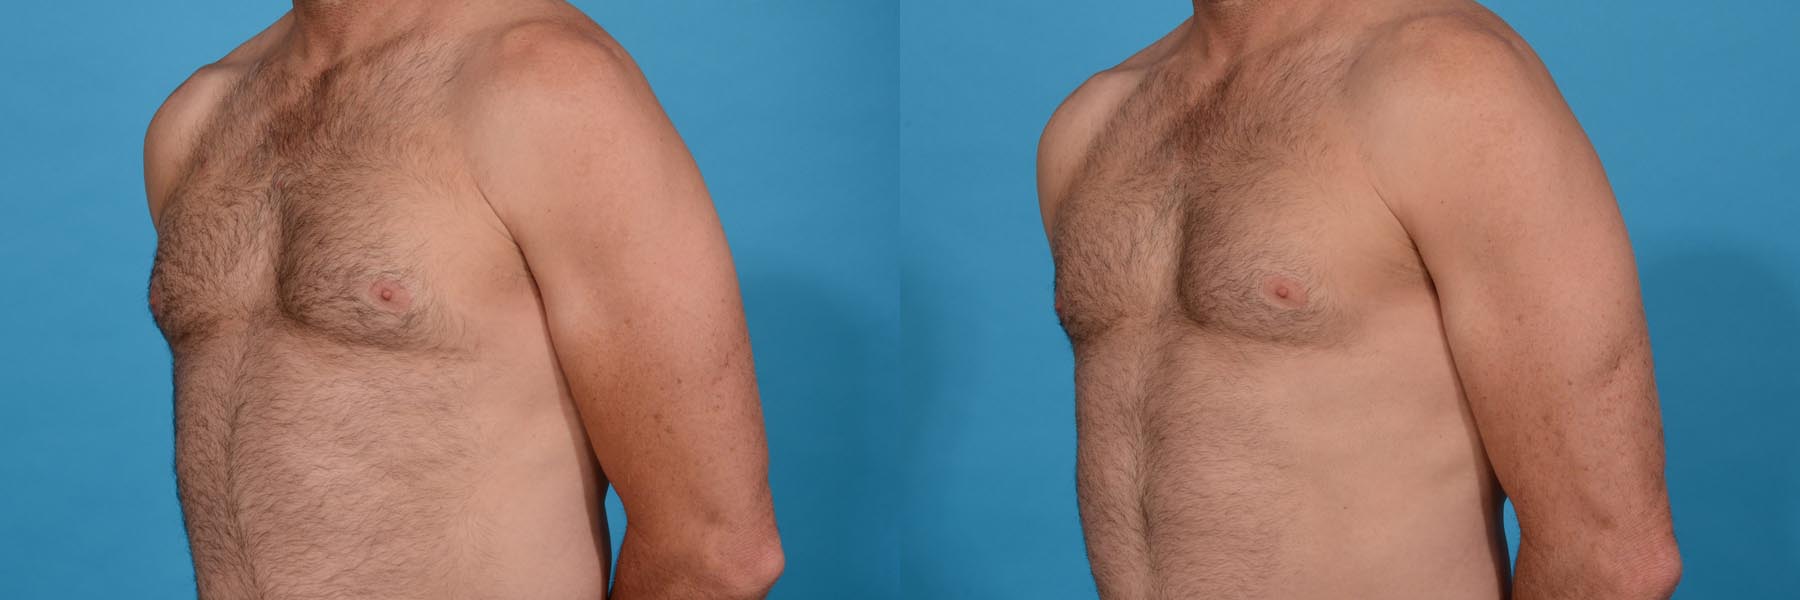 Chest Contouring with Abdominal Etching Before and After Photo by Sculpt Aesthetic Center in Frisco, TX